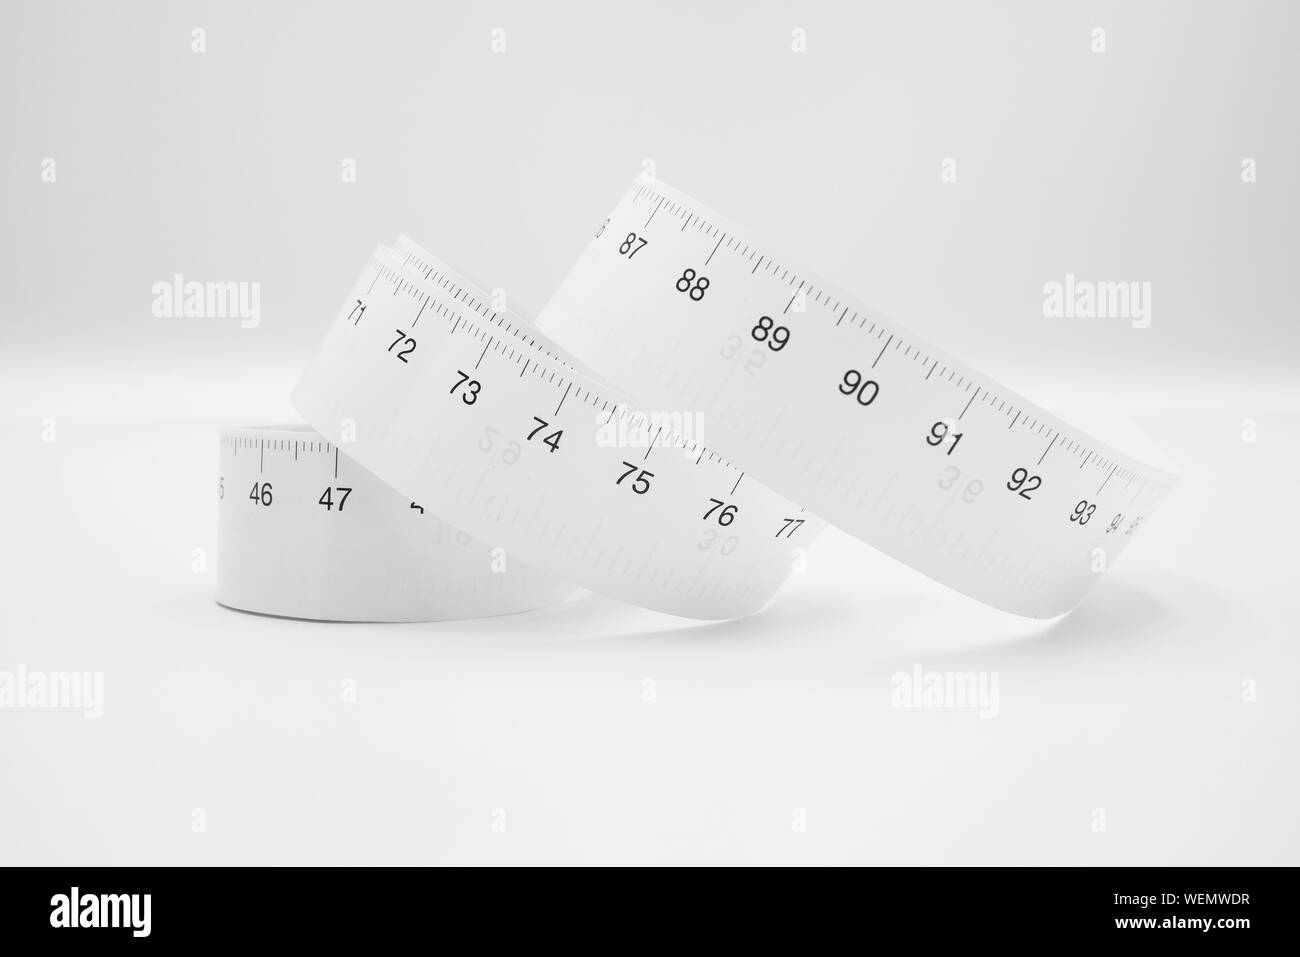 White measuring tape ruler metric measurement or diet concept isolated on white background. Stock Photo